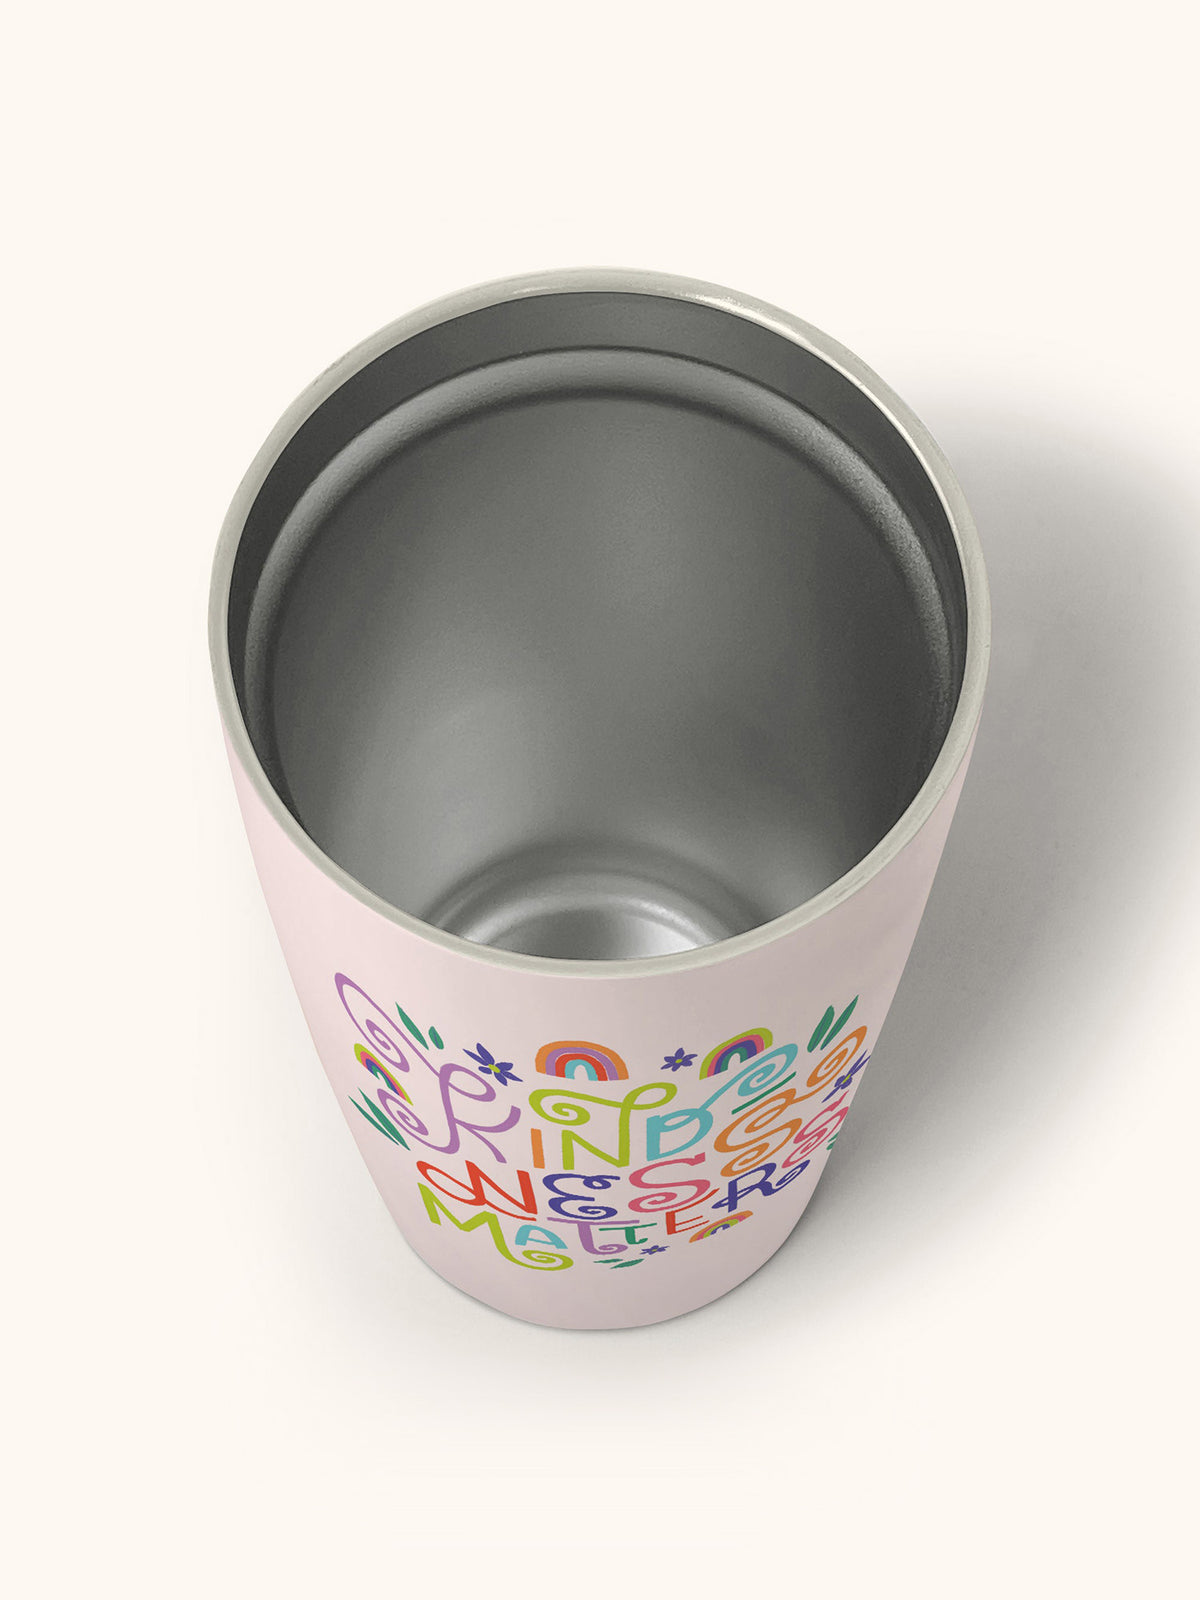 Sassy Flowers Insulated Stainless Steel Water Tumbler